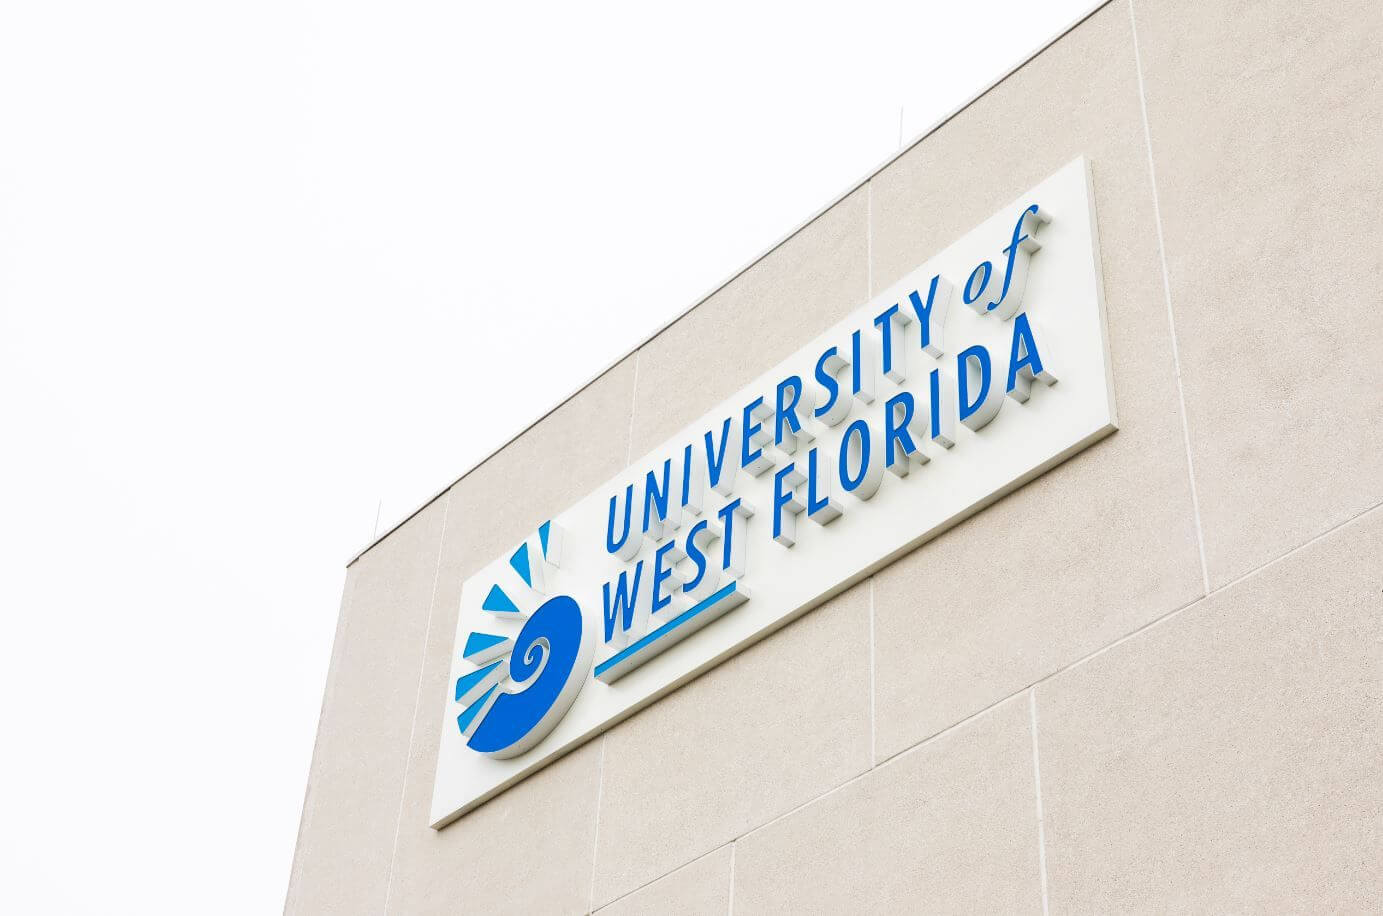 University of West Florida sign on building.